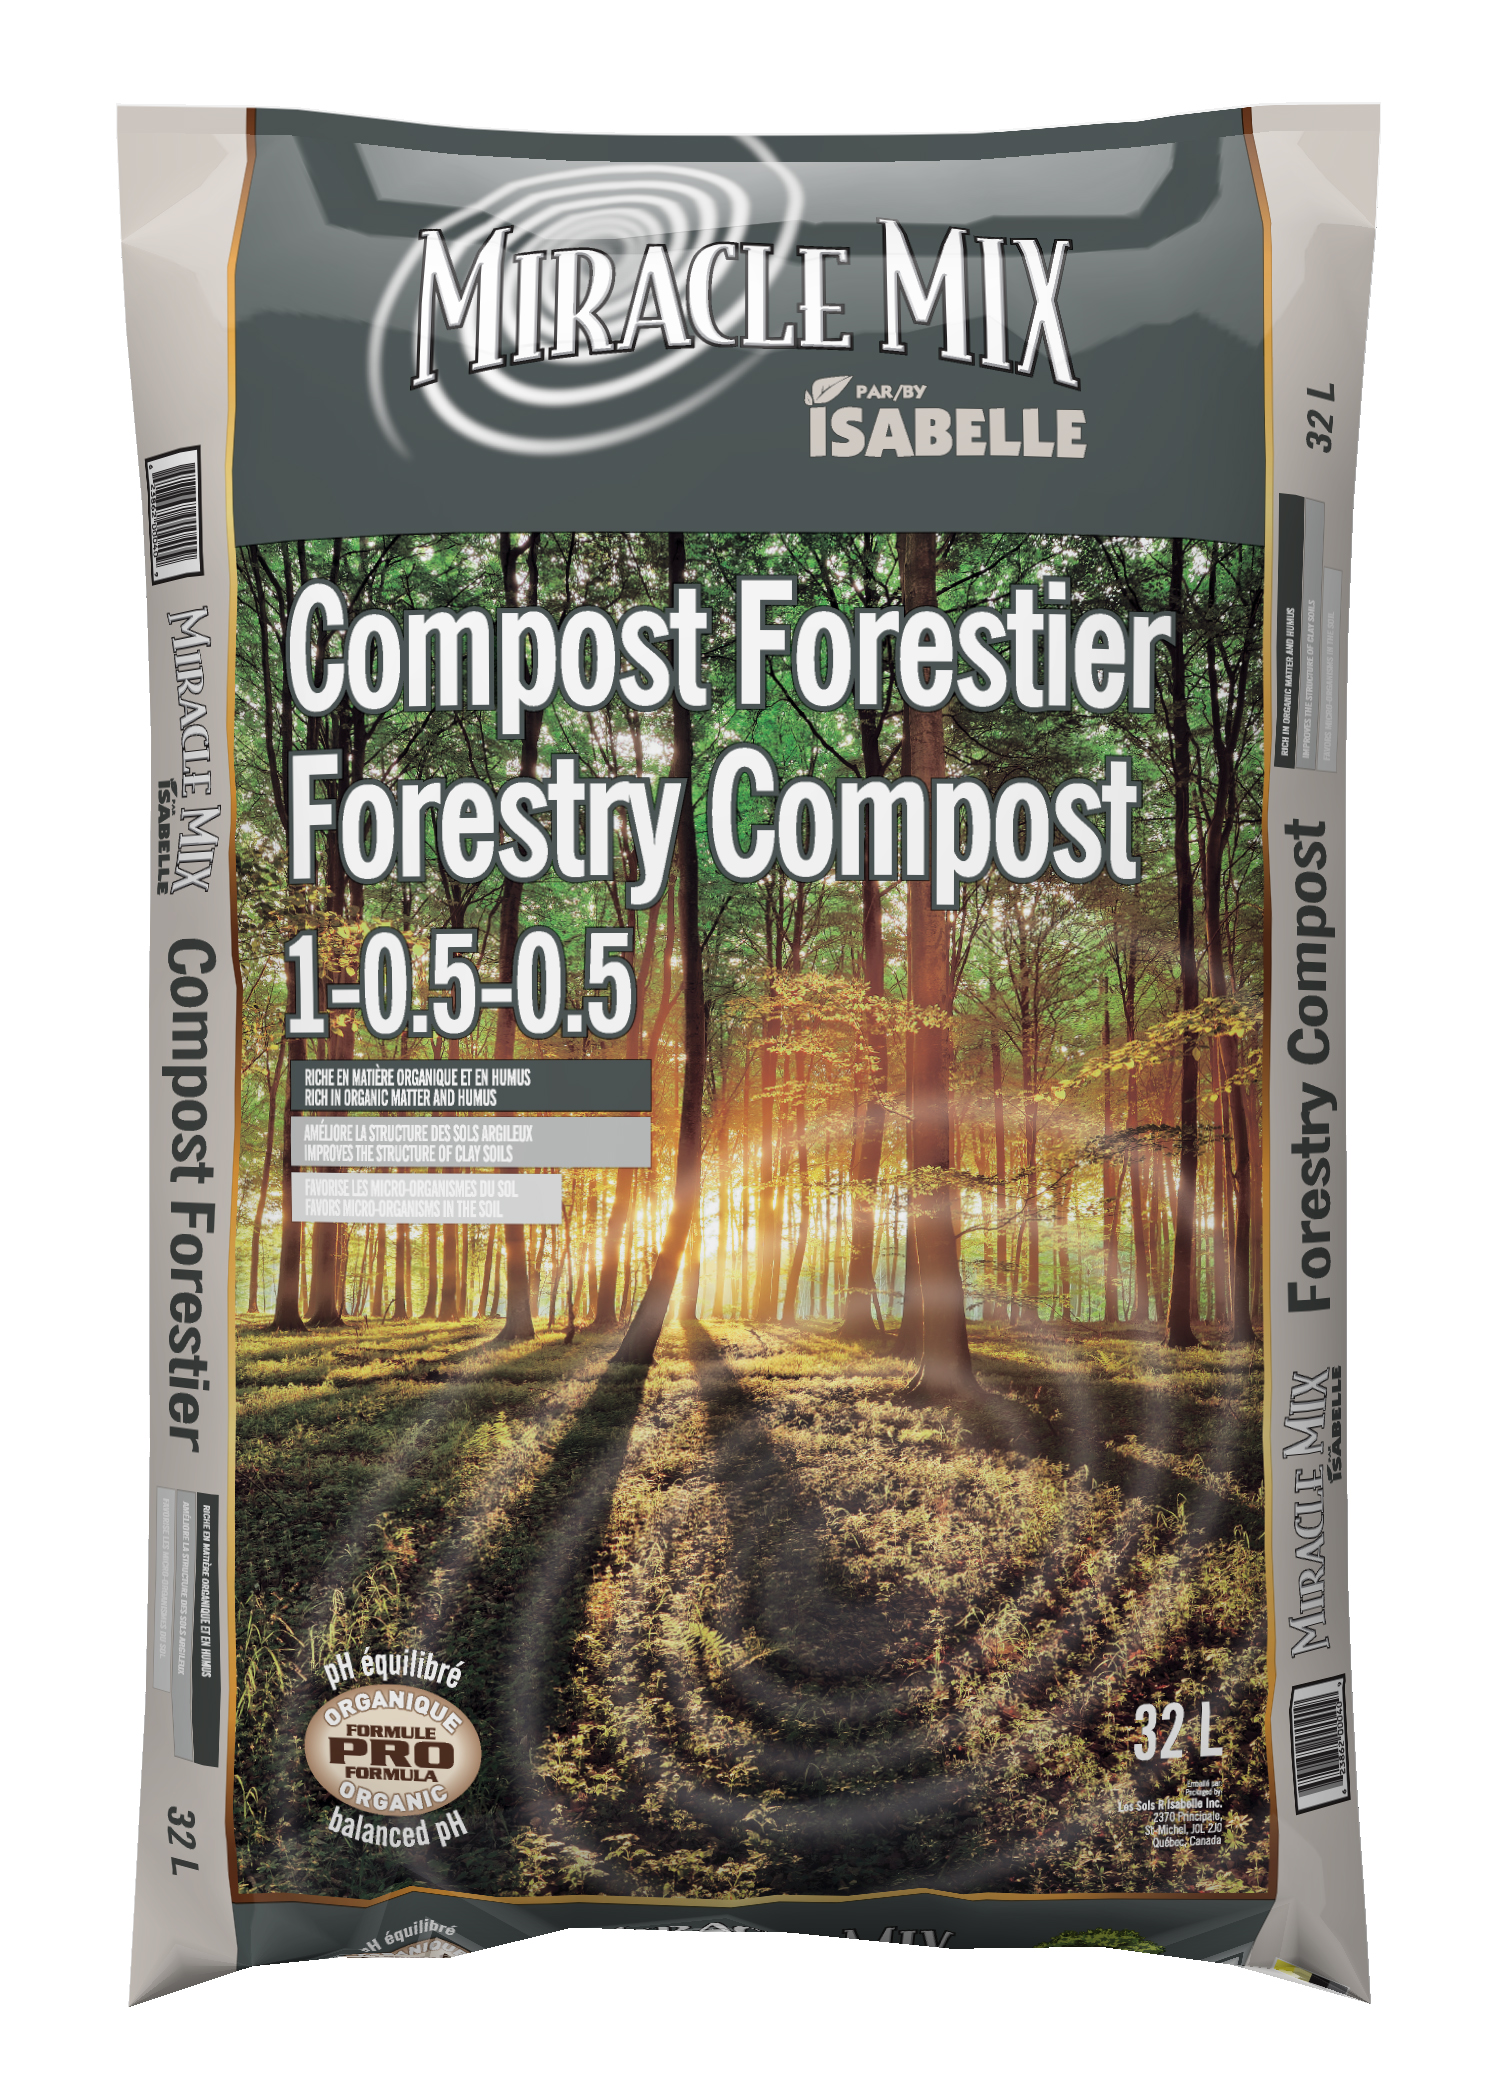 140689 Miracle Mix Forestry Compost_R7V0_3D